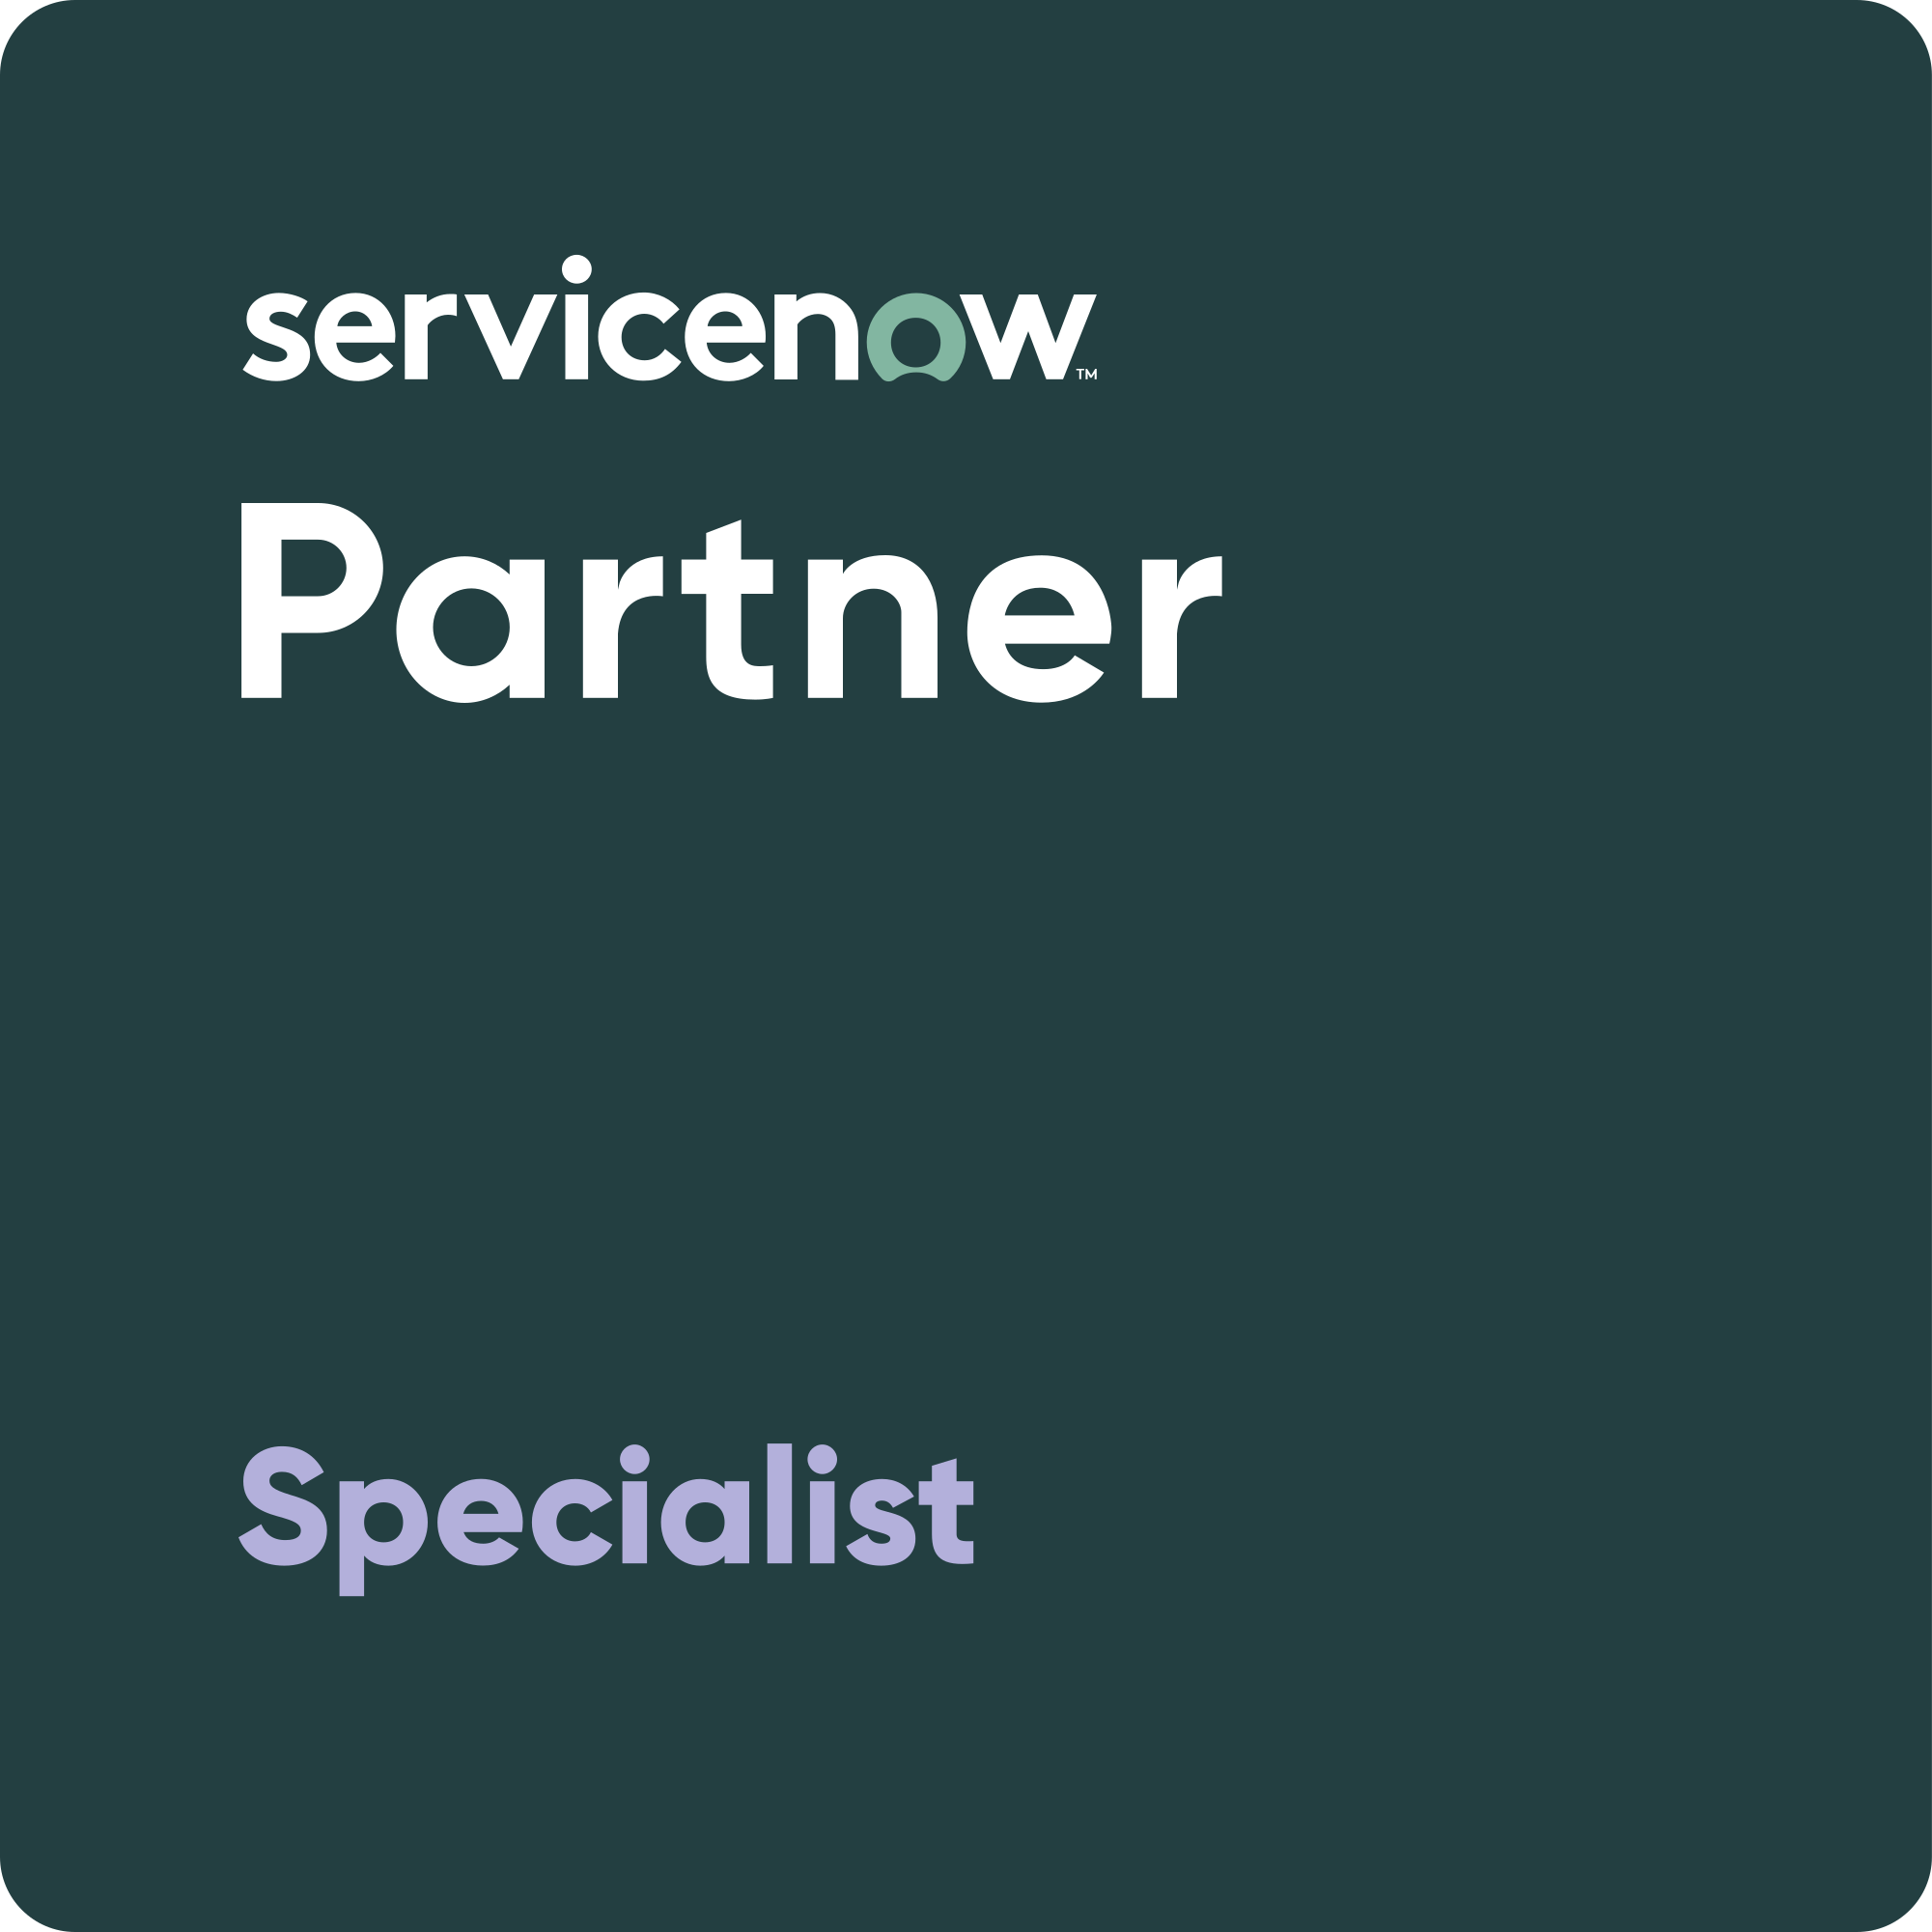 servicenow-specialist-partner.png